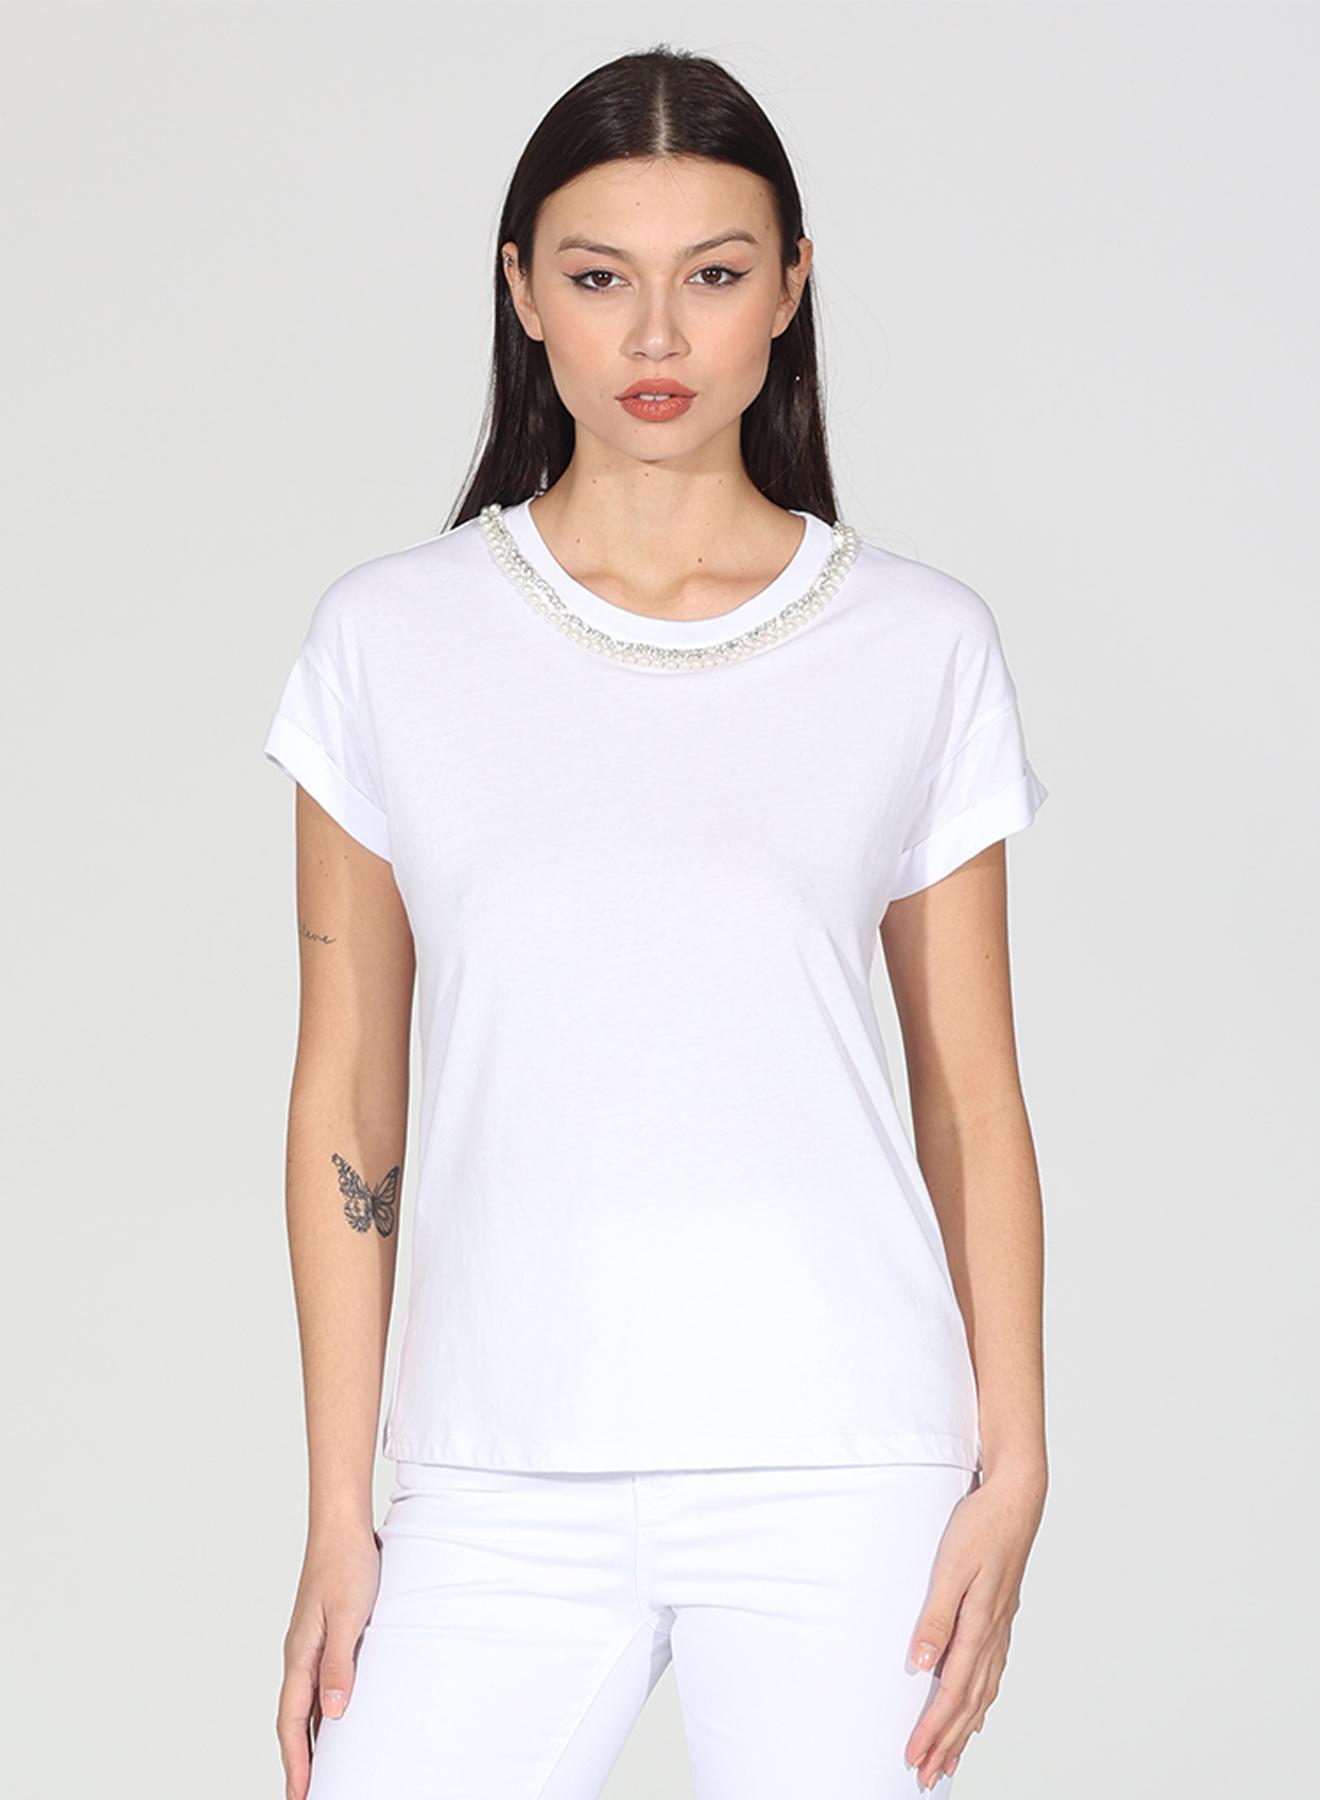 White T-shirt with rhinestones and pearls R.R. - 3